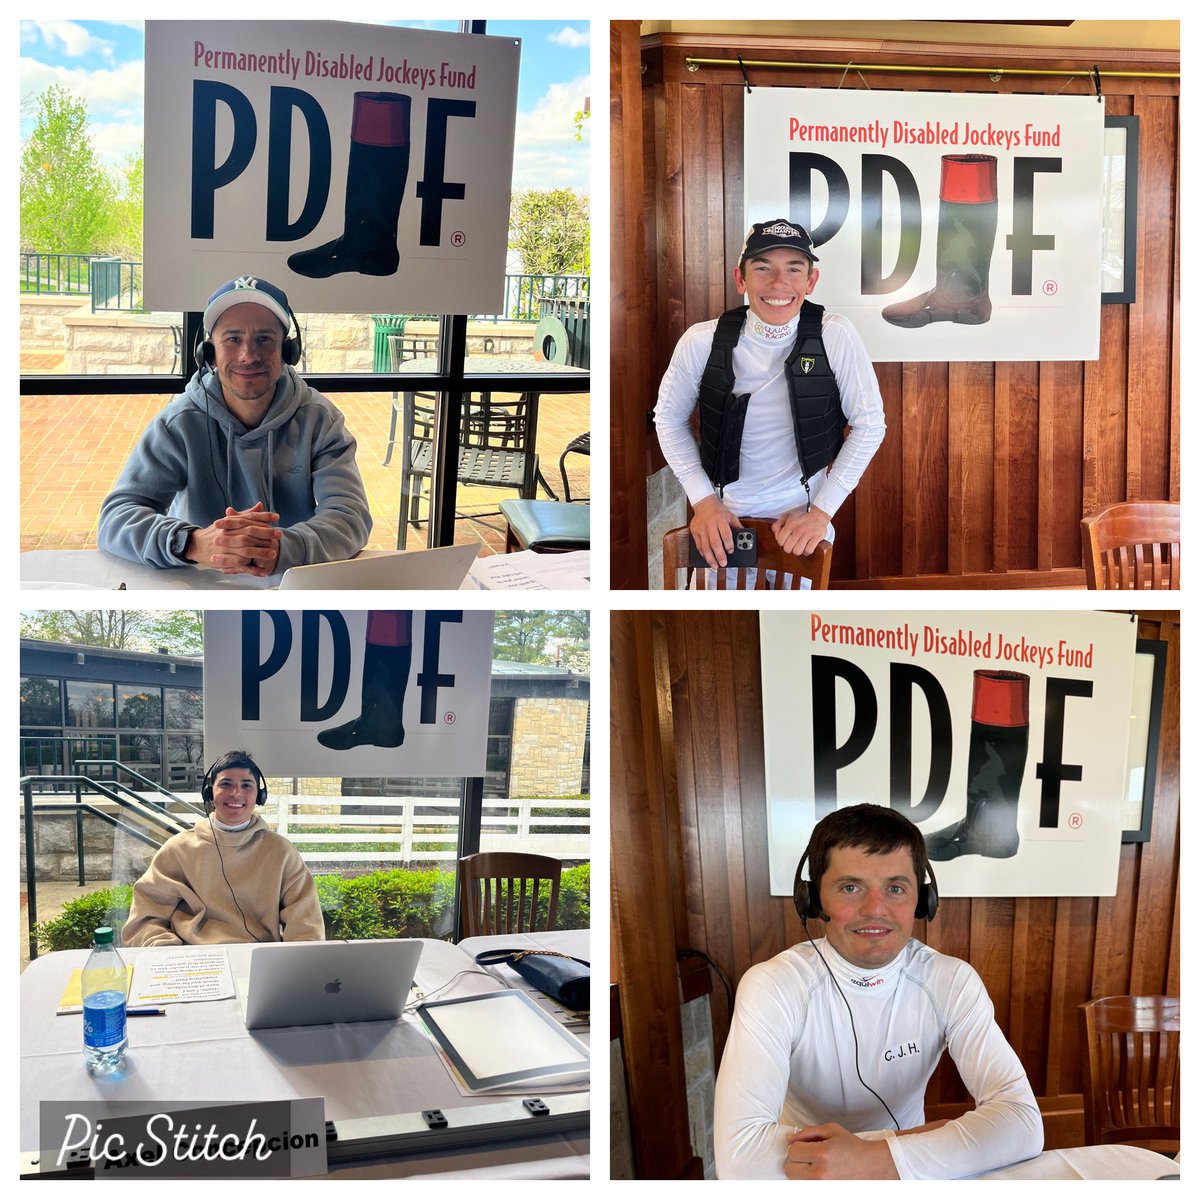 We are down to the wire… Call in at 844-884-PDJF or donate online at pdjf.org/donate